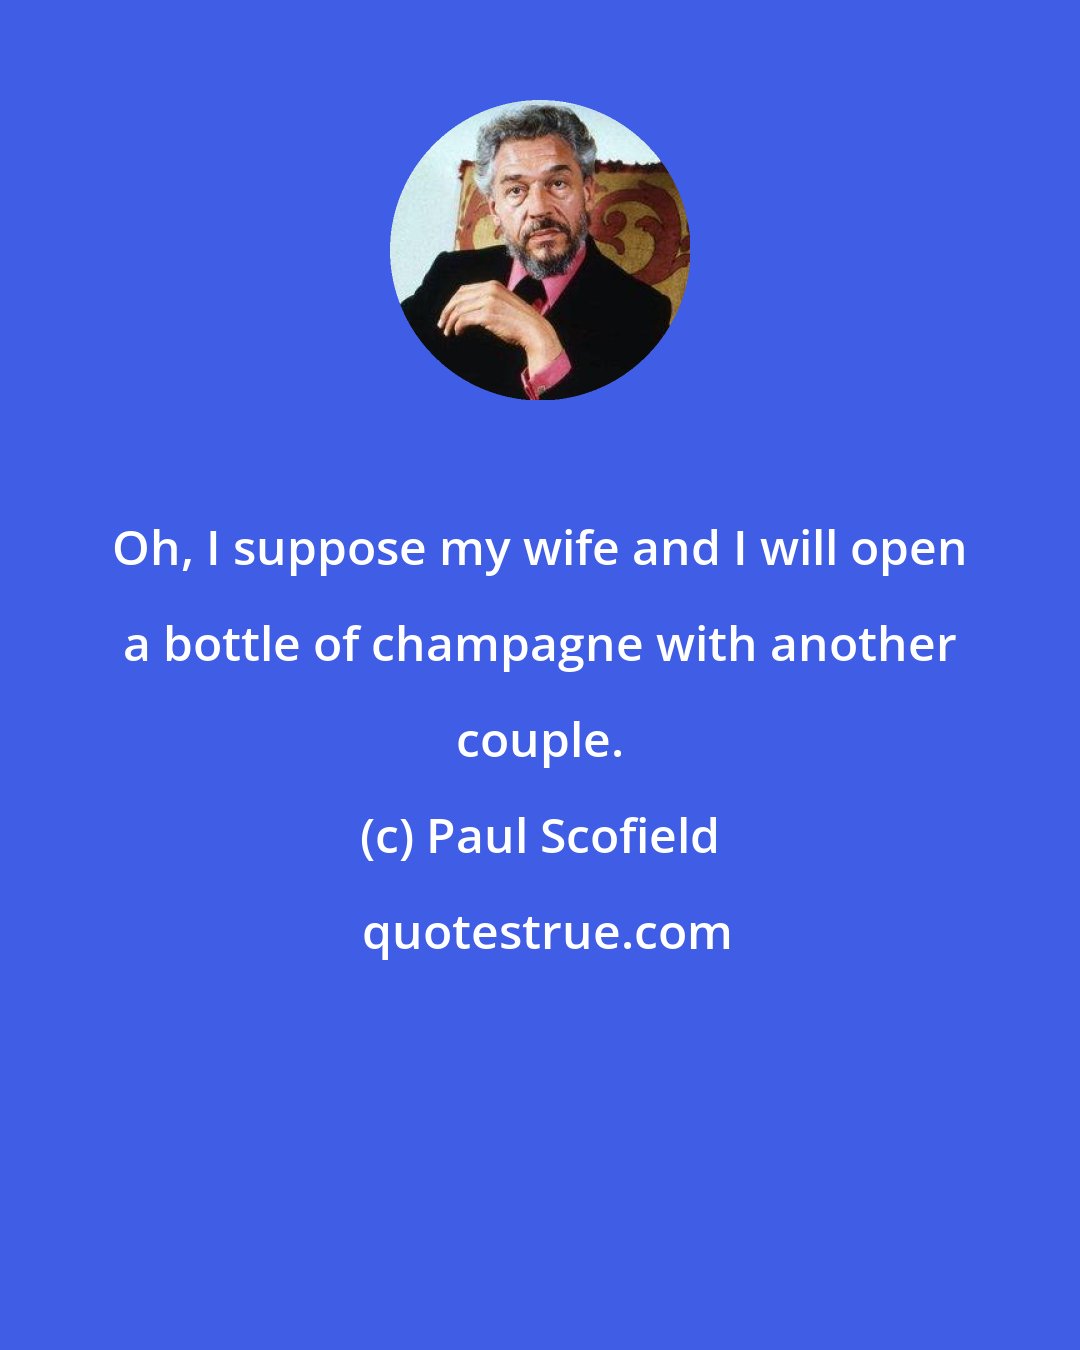 Paul Scofield: Oh, I suppose my wife and I will open a bottle of champagne with another couple.